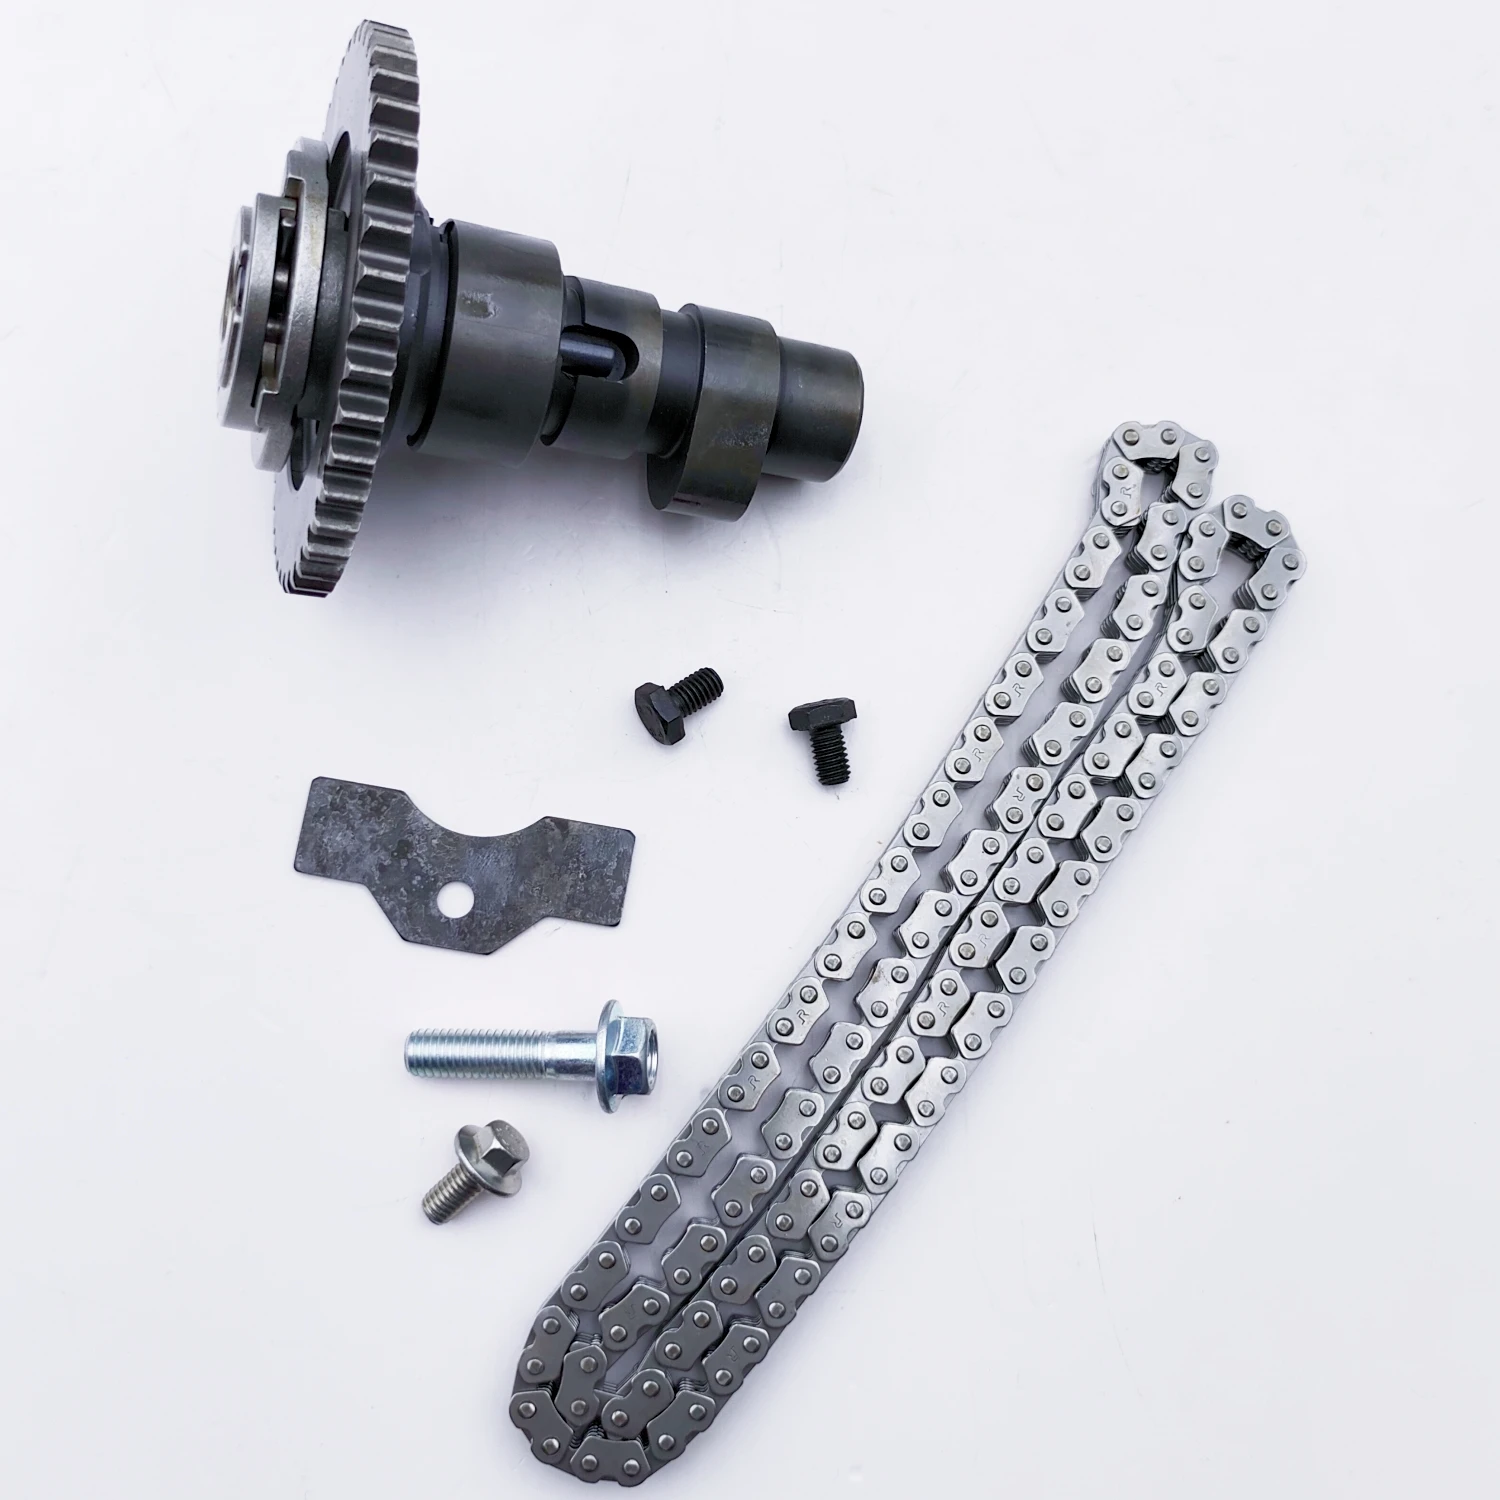 Camshaft Assy with Timing Chain for CFMoto 500S 520 500HO X5H.O. 550 X550 U550 Z550 191R Gladiator Goes Cobalt 550i 0GR0-024000 oil strainer with plate for for cfmoto 400 450 500s 520 x5ho 550 x550 u550 z550 600 touring 625 u6 0gr0 011001 0gr0 011010